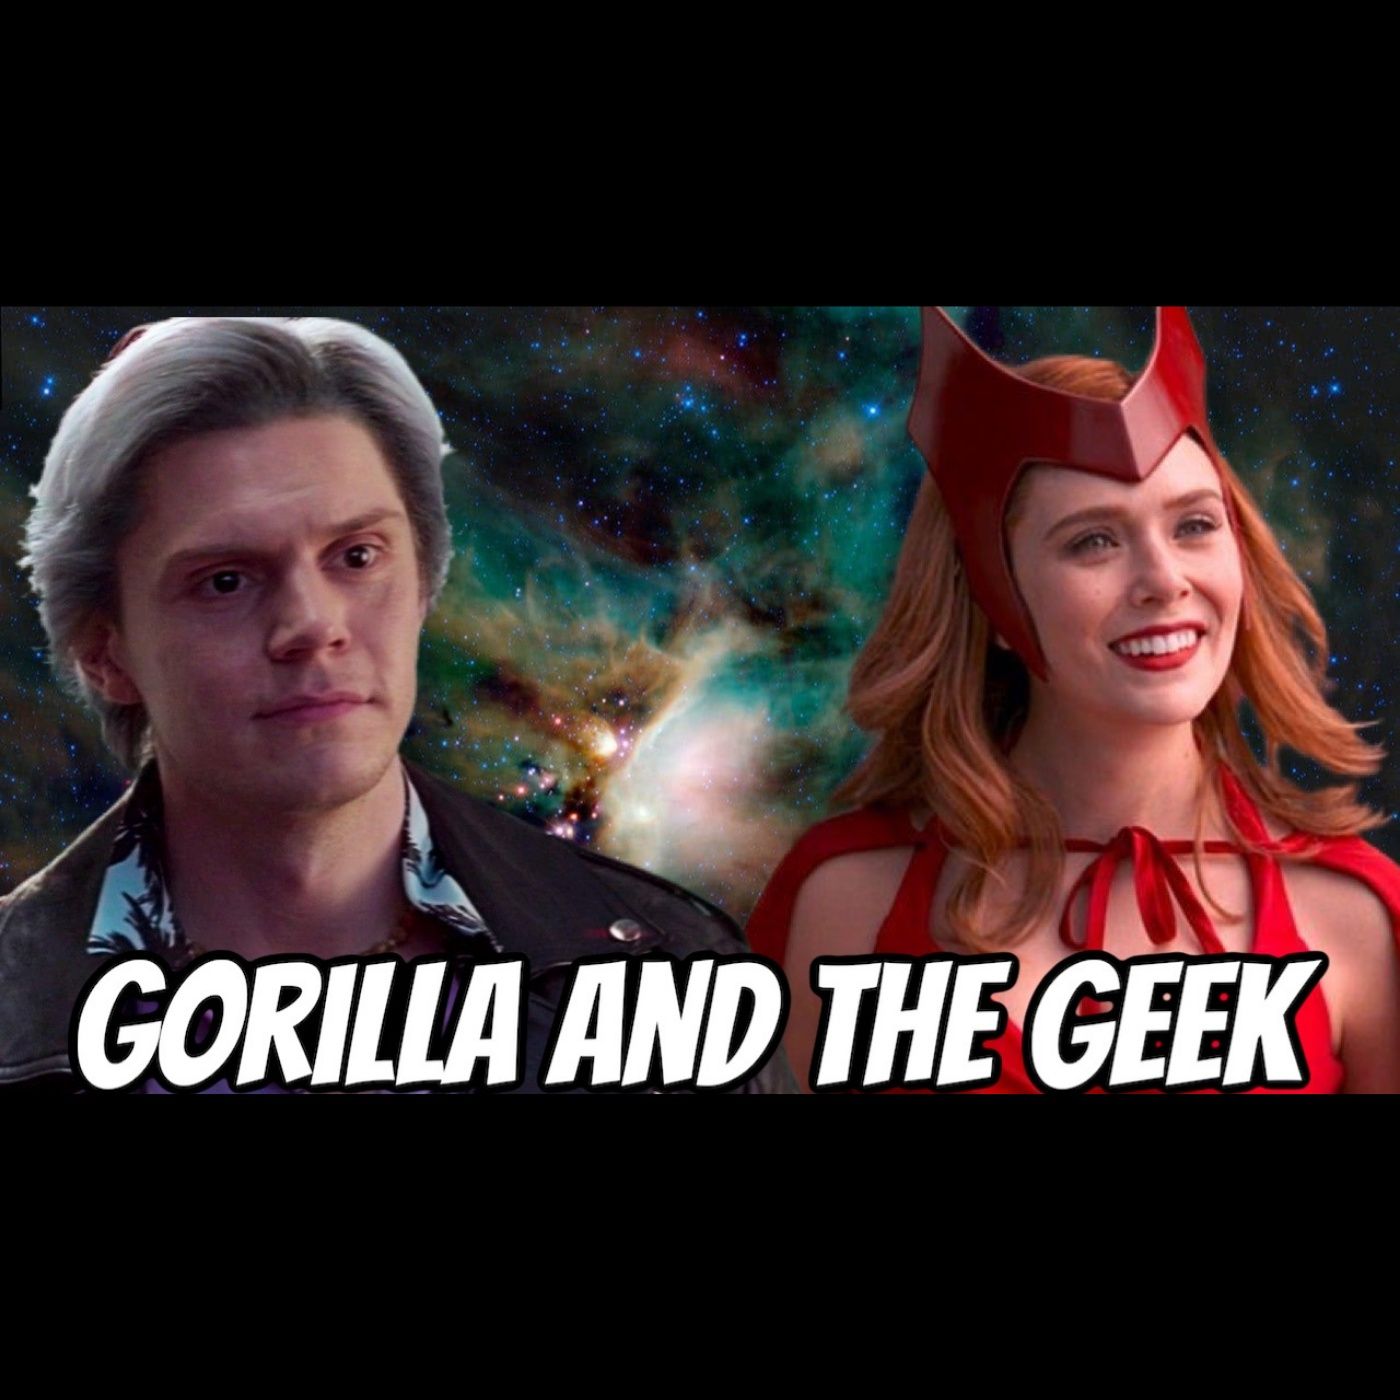 WandaVision Episodes 5 and 6 Discussion - Gorilla and The Geek Episode 38